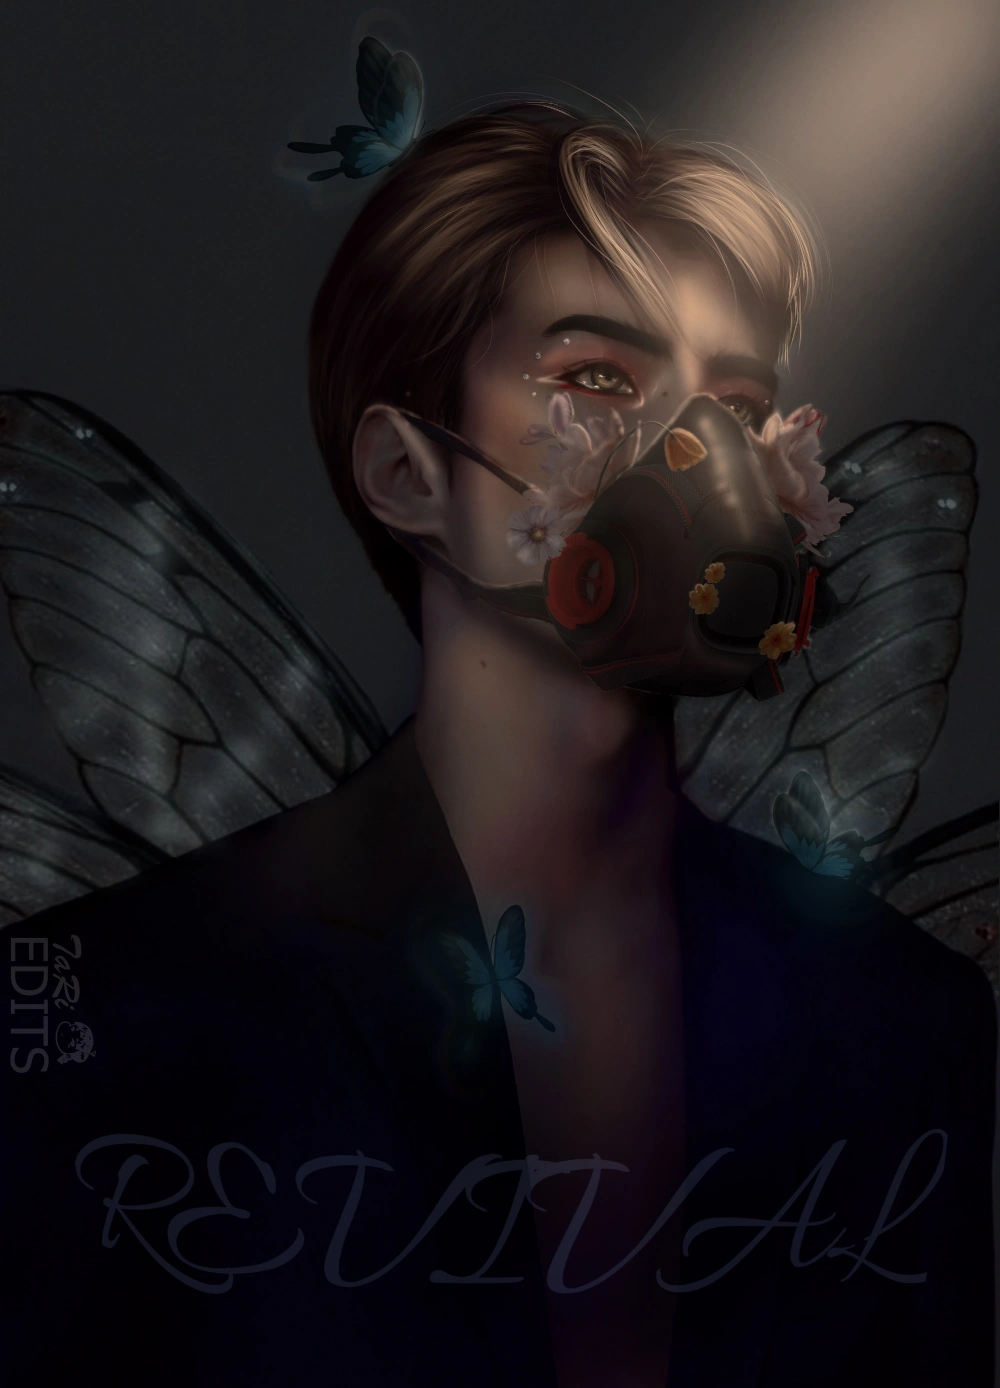 Sehun (EXO) 
Edit requested